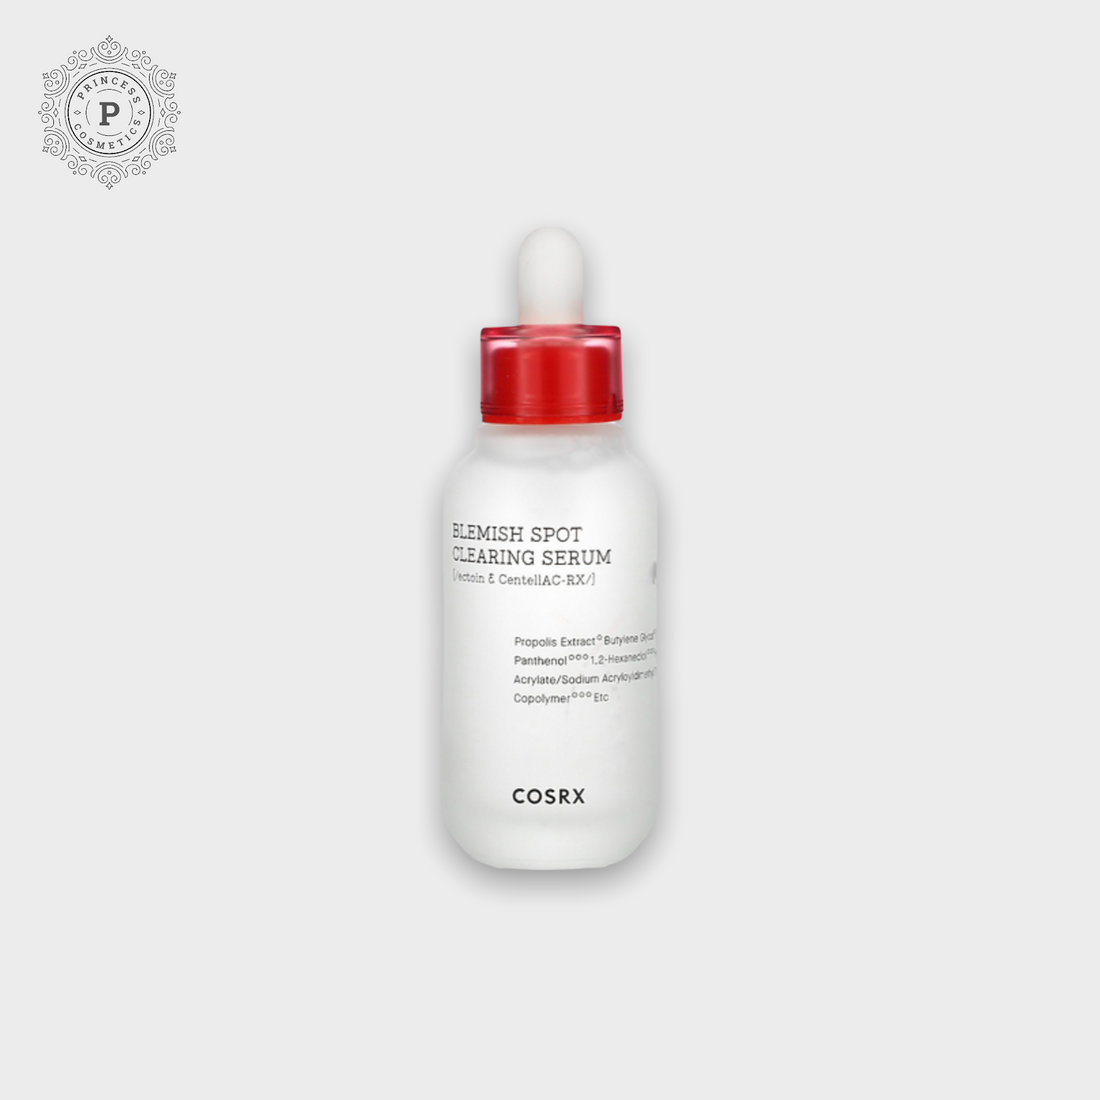 Cosrx AC Collection Blemish Spot Clearing Serum 40ml